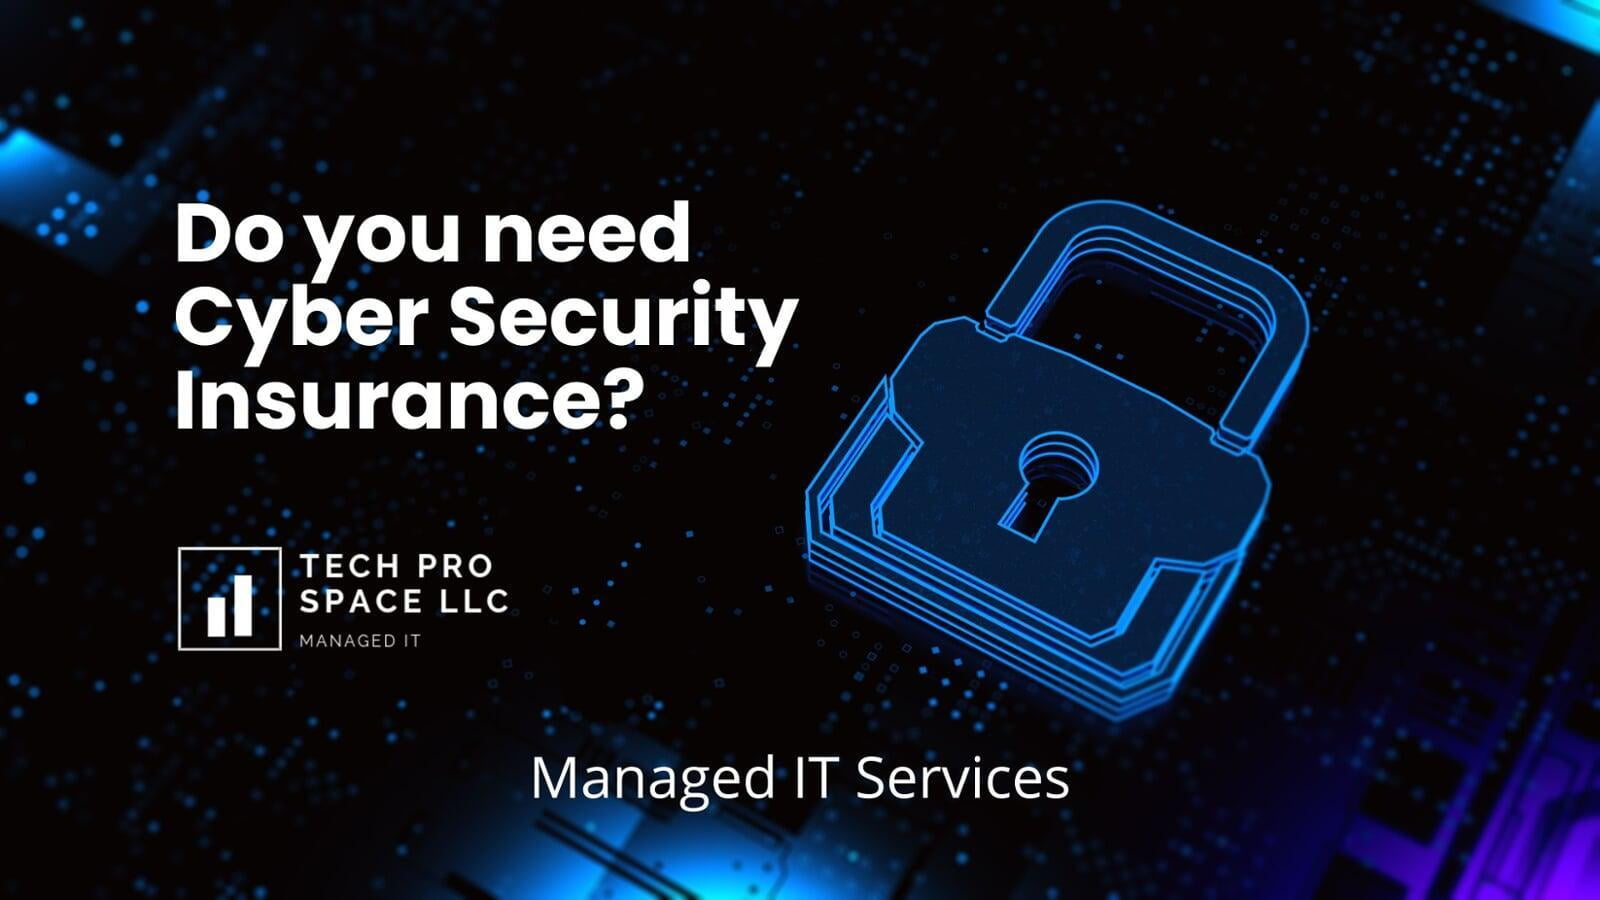 Do you need Cyber Security Insurance?